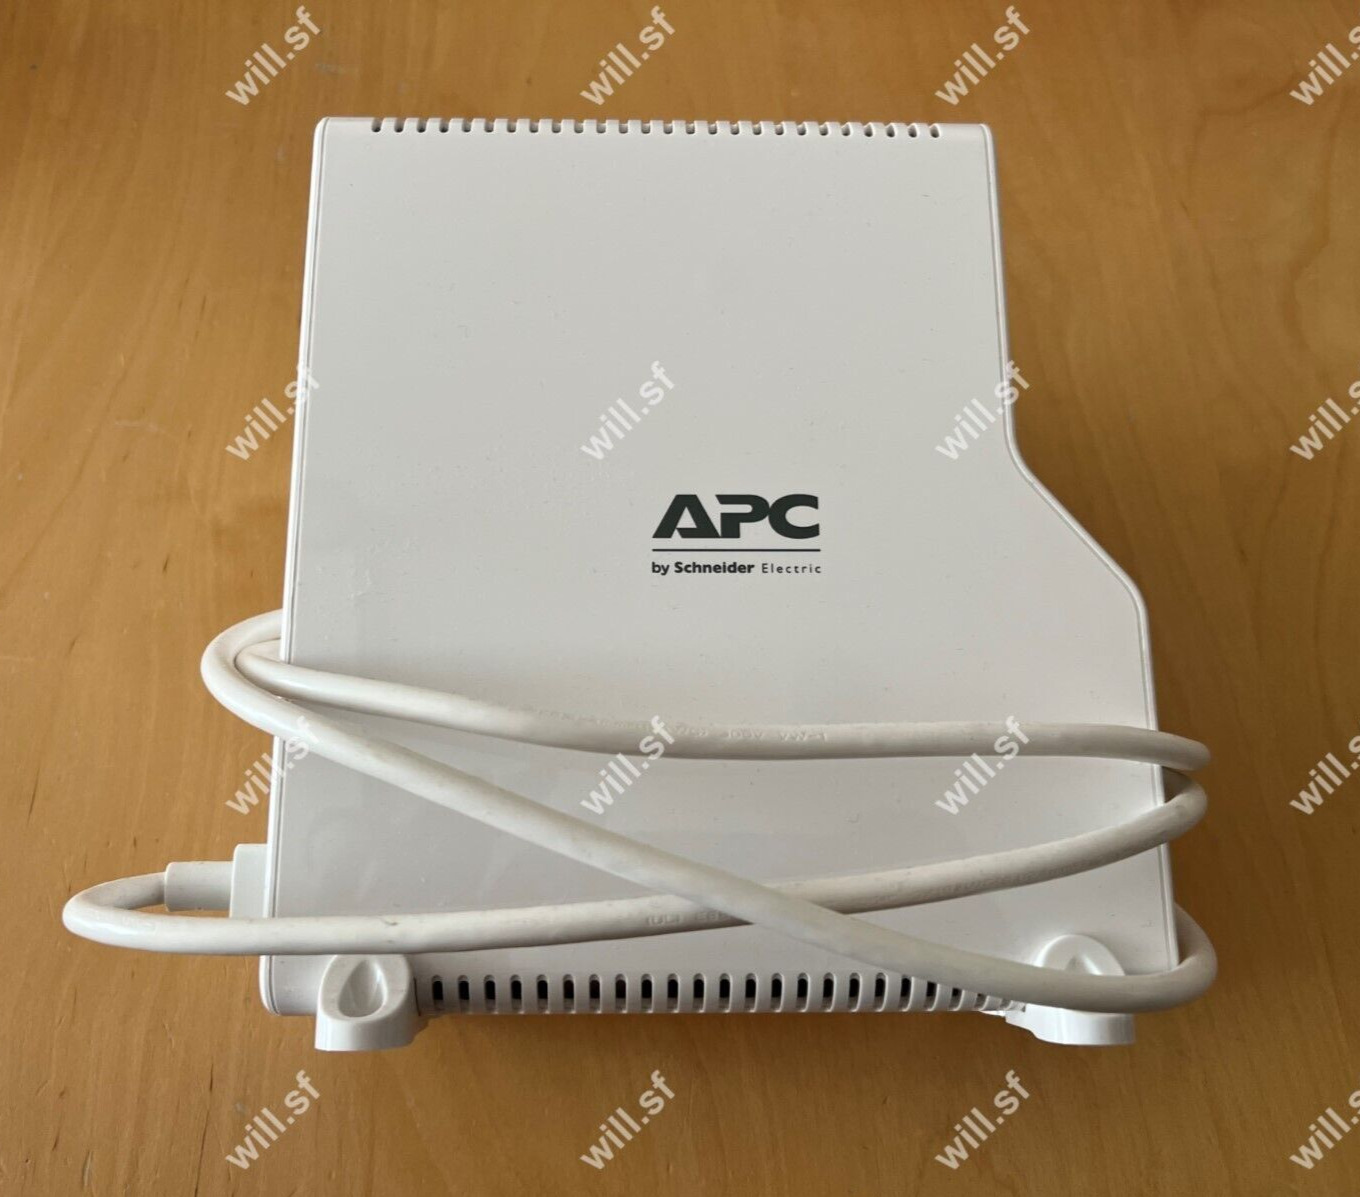 APC Back-UPS Connect 50 Lithium Ion Network UPS - BGE50ML - BATTERY NOT INCLUDED